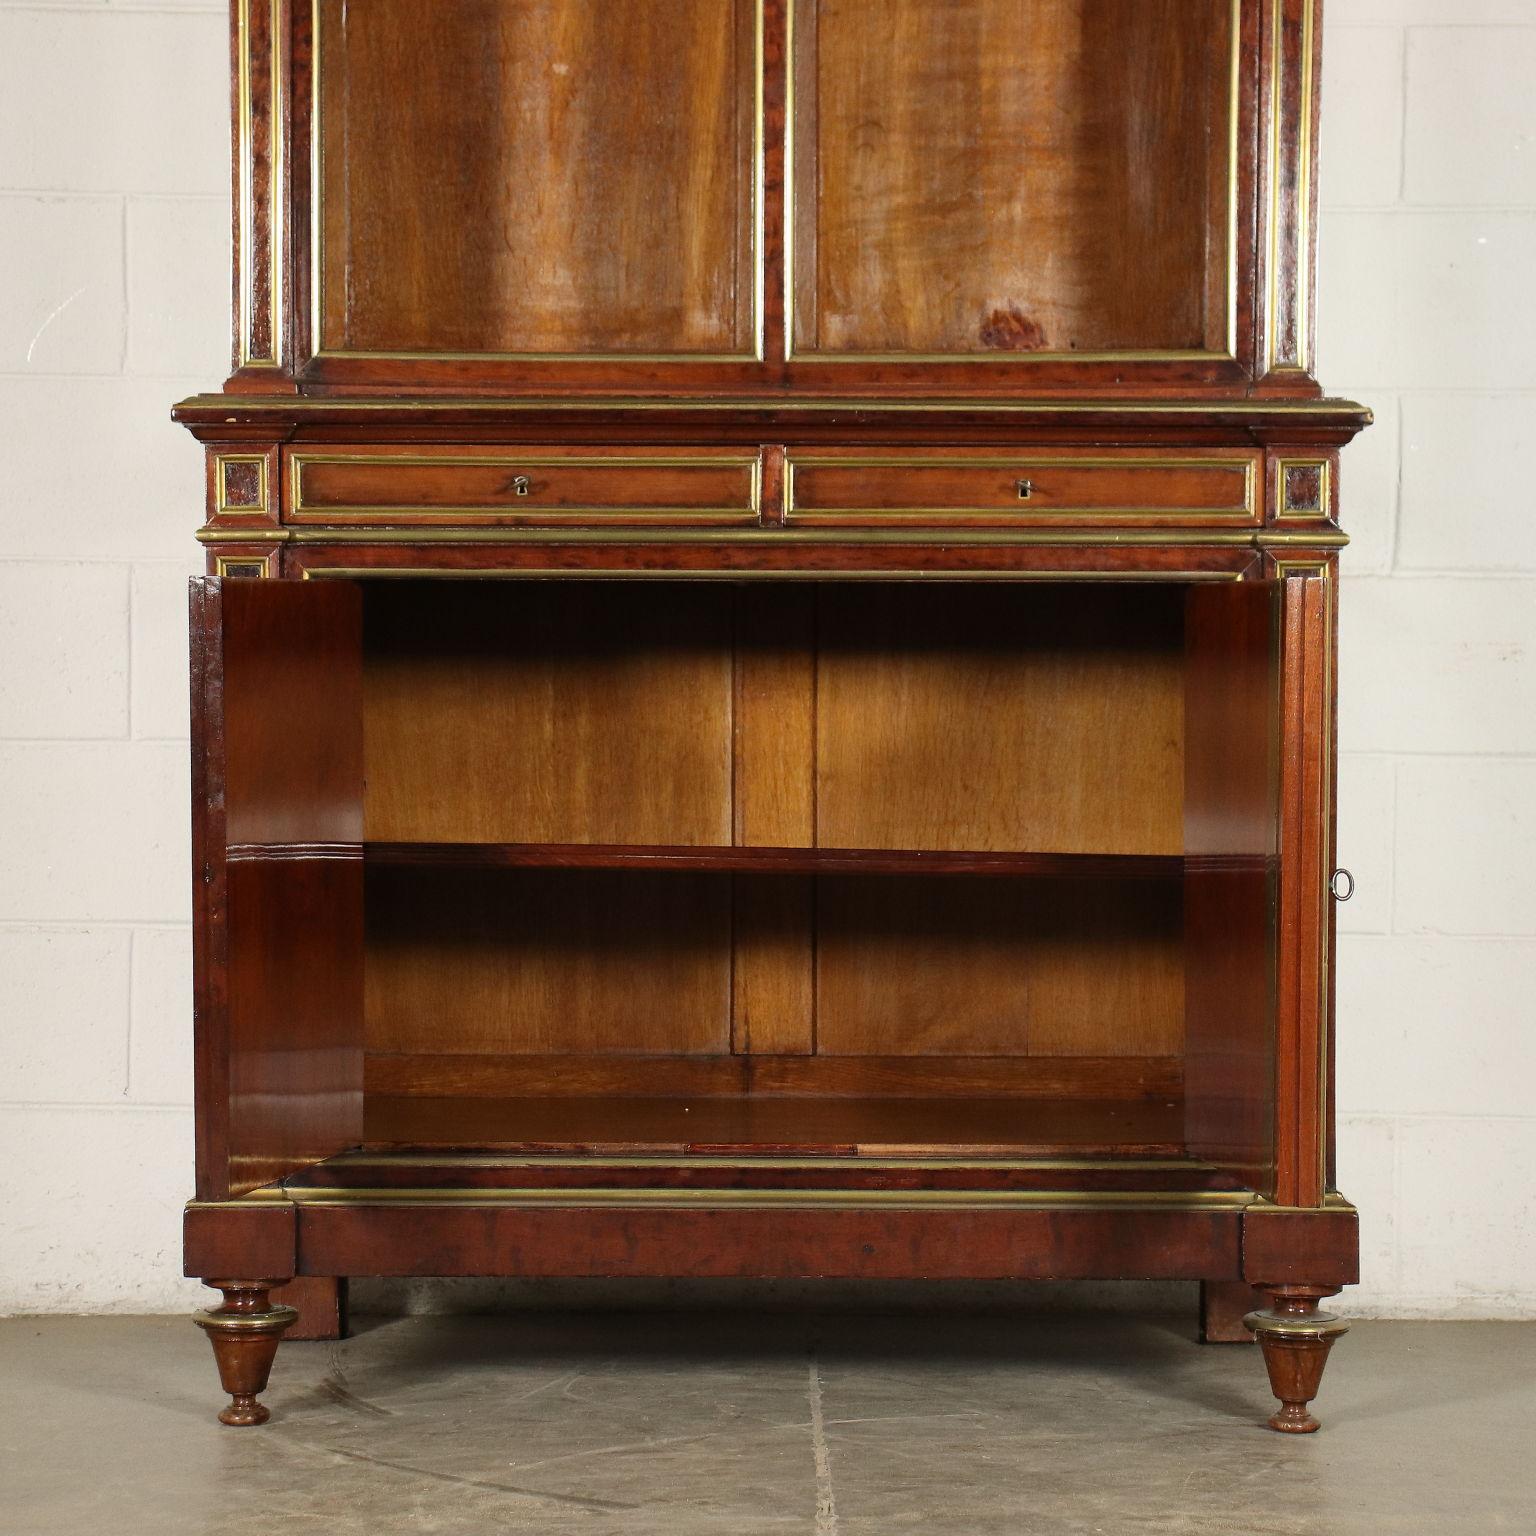 Bookcase Empire Mahogany Veneer Sessile Oak France Early 19th Century For Sale 3